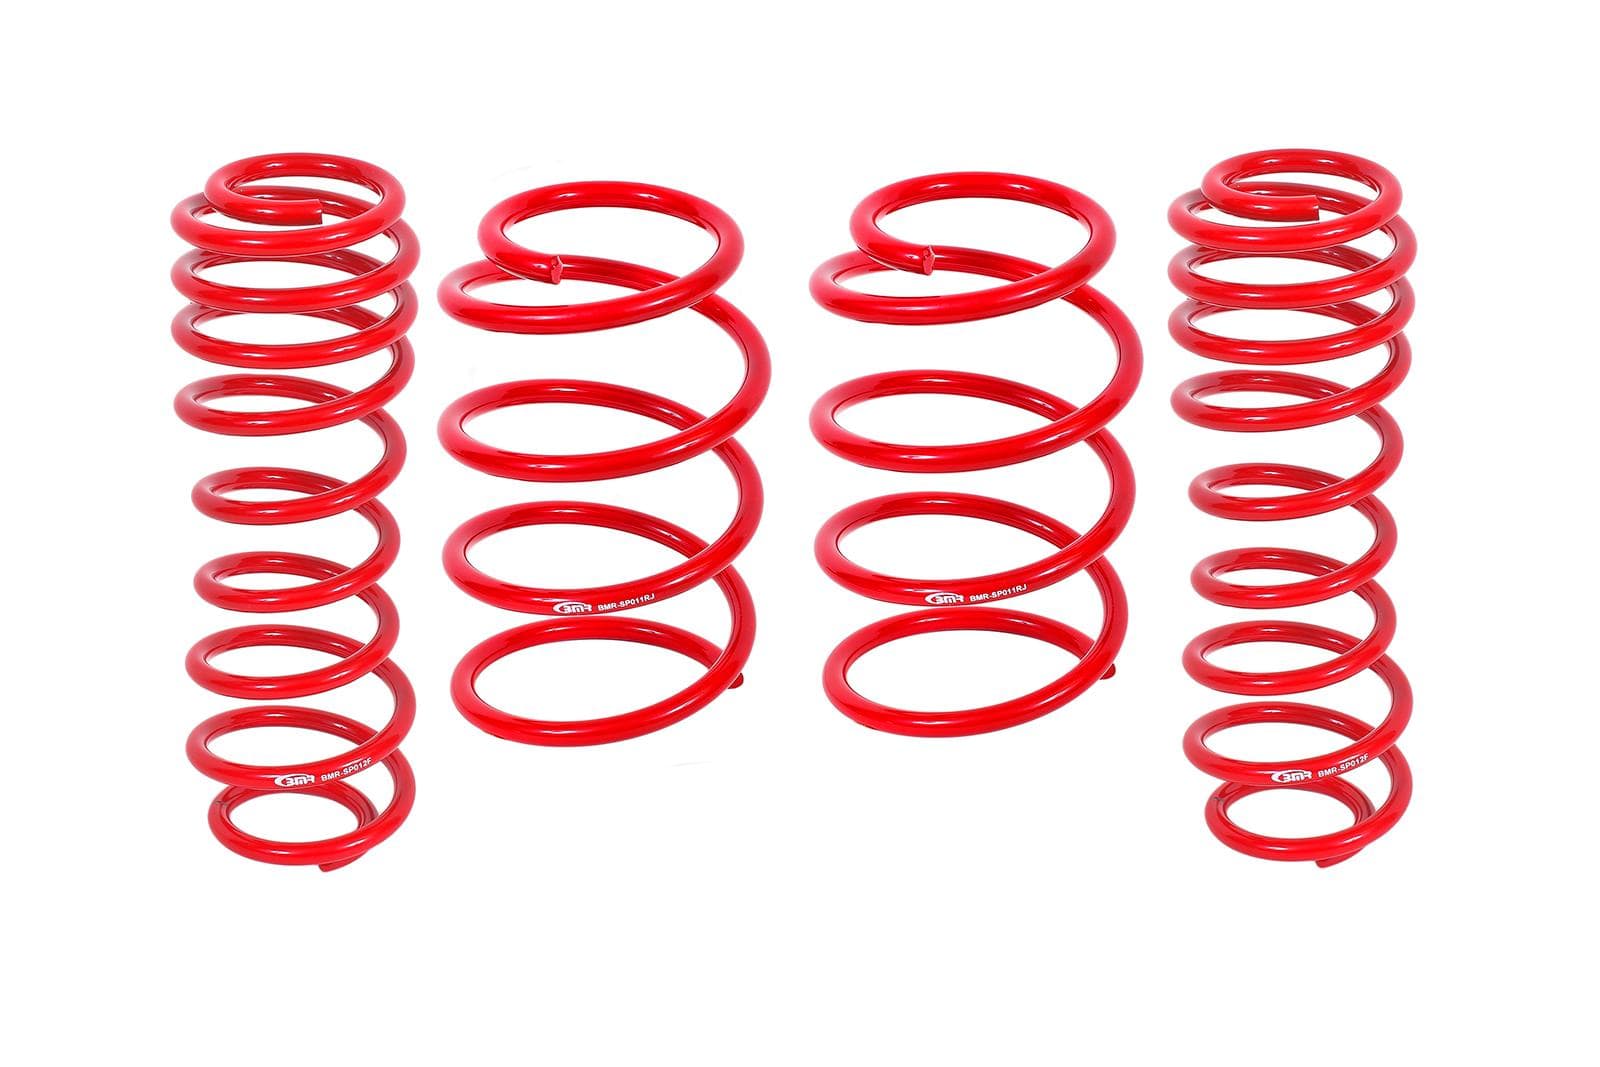 BMR Suspension Lowering Springs for 2005-2014 Ford Mustang (S197) SP009R